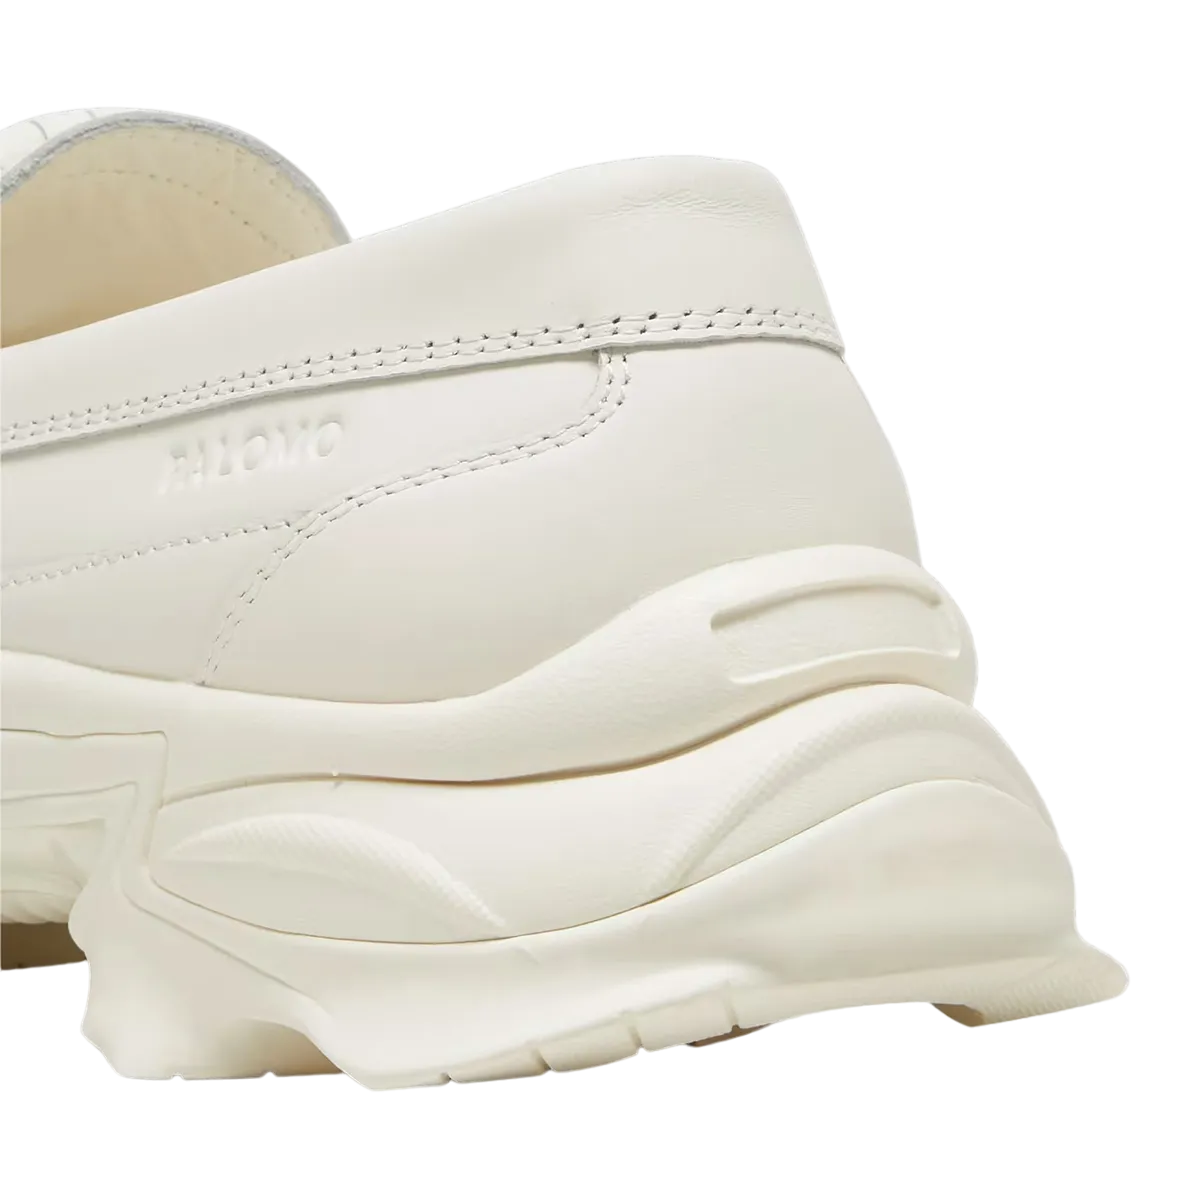 Palomo x PUMA Nitefox Loafer Frosted Ivory 396840-01